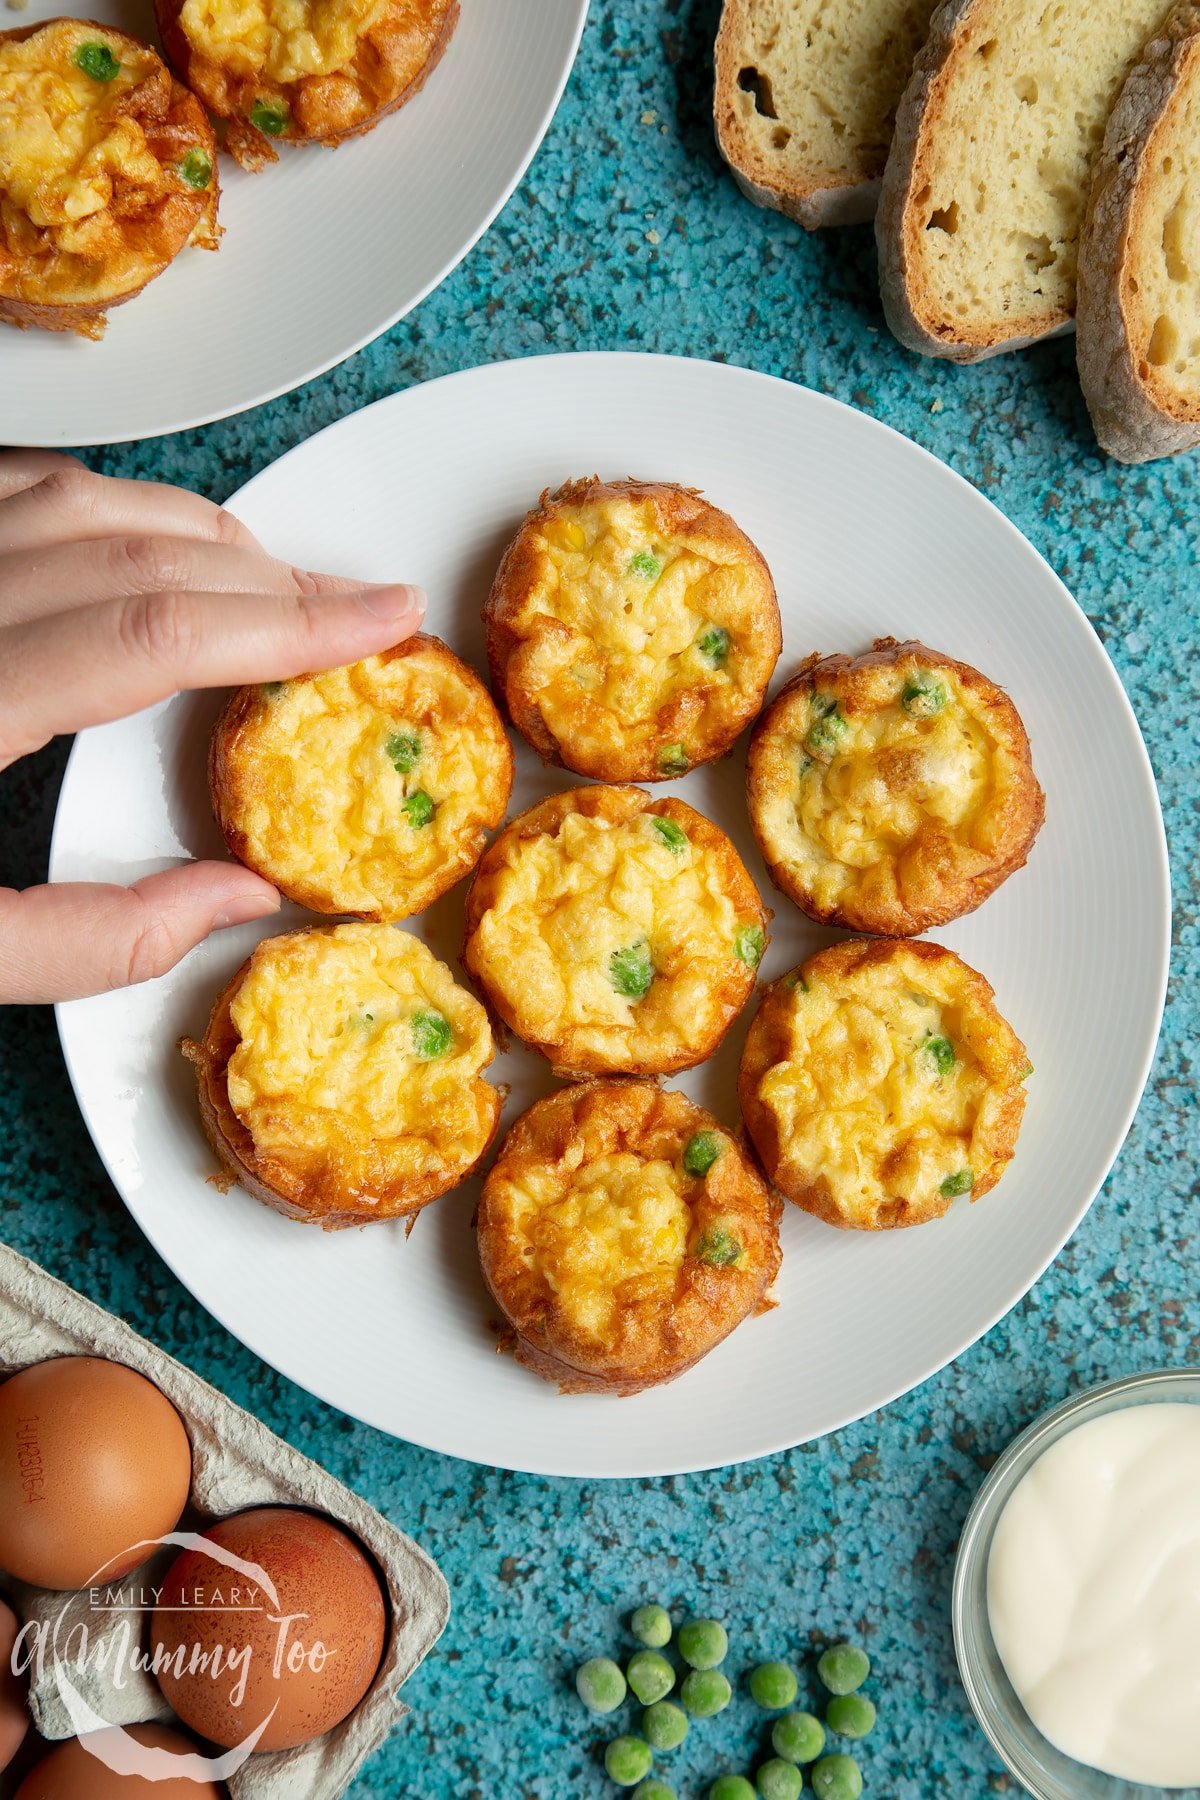 Mini vegetable frittatas arranged on a white plate. Slices of bread and ingredients surround the plate. A hand reaches in to take a frittata.